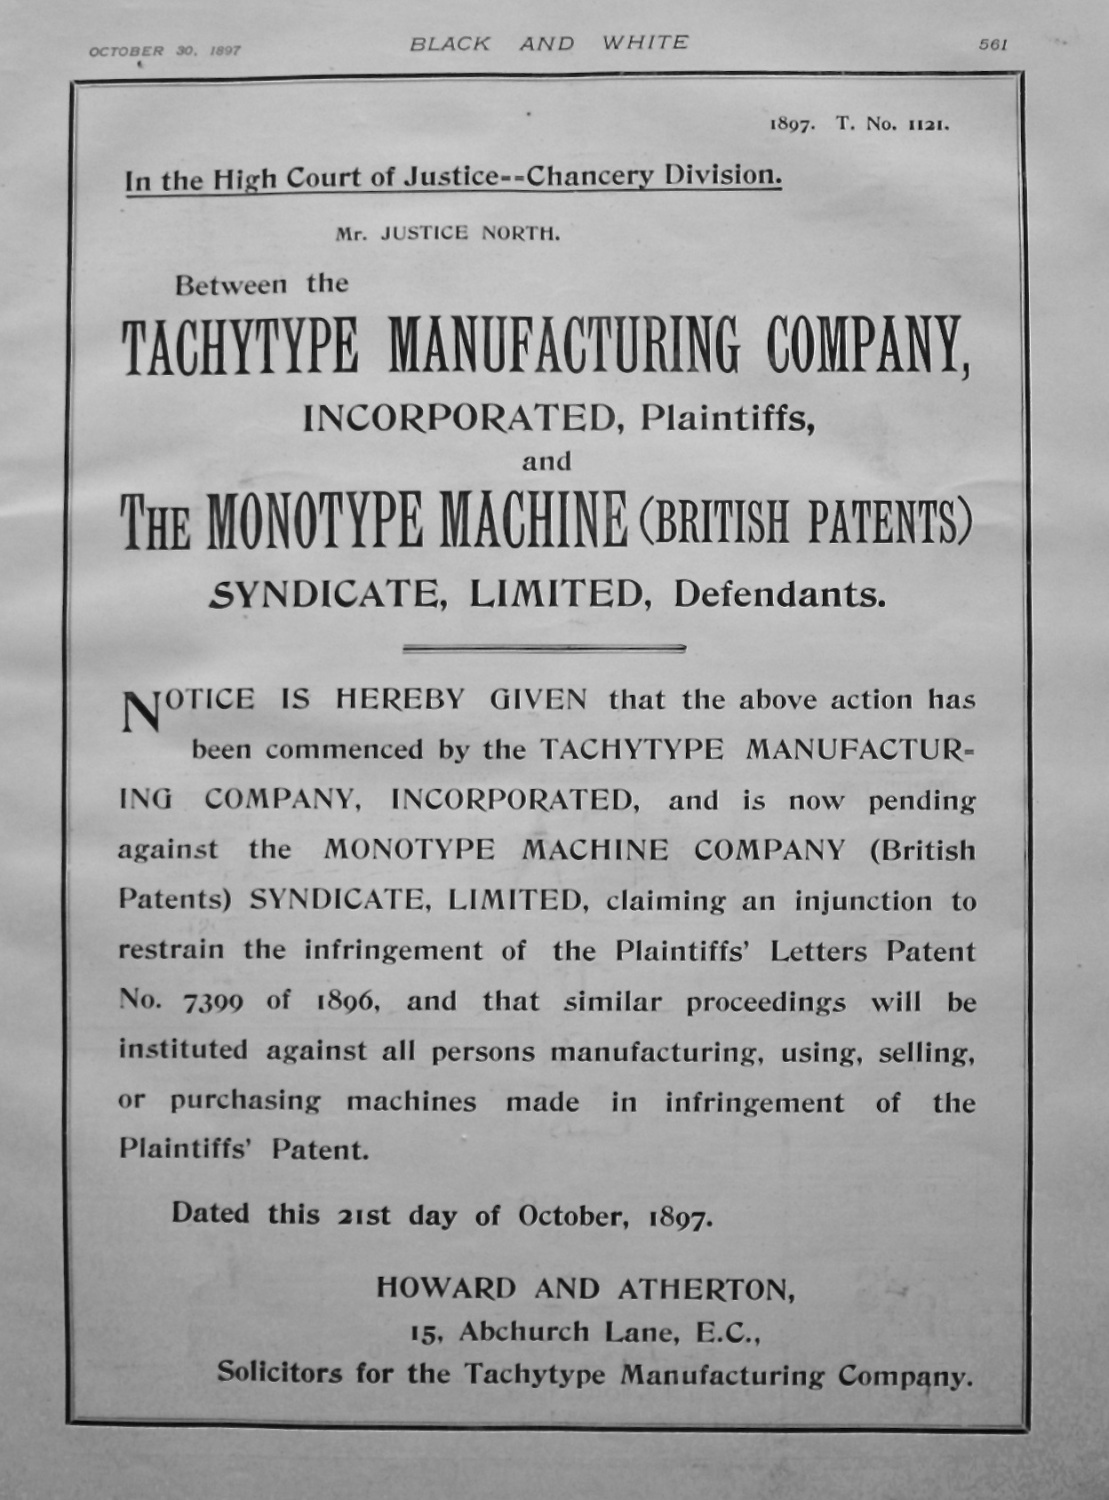 Tachytype Manufacturing Company, incorporated Plaintiffs, and The Monotype 